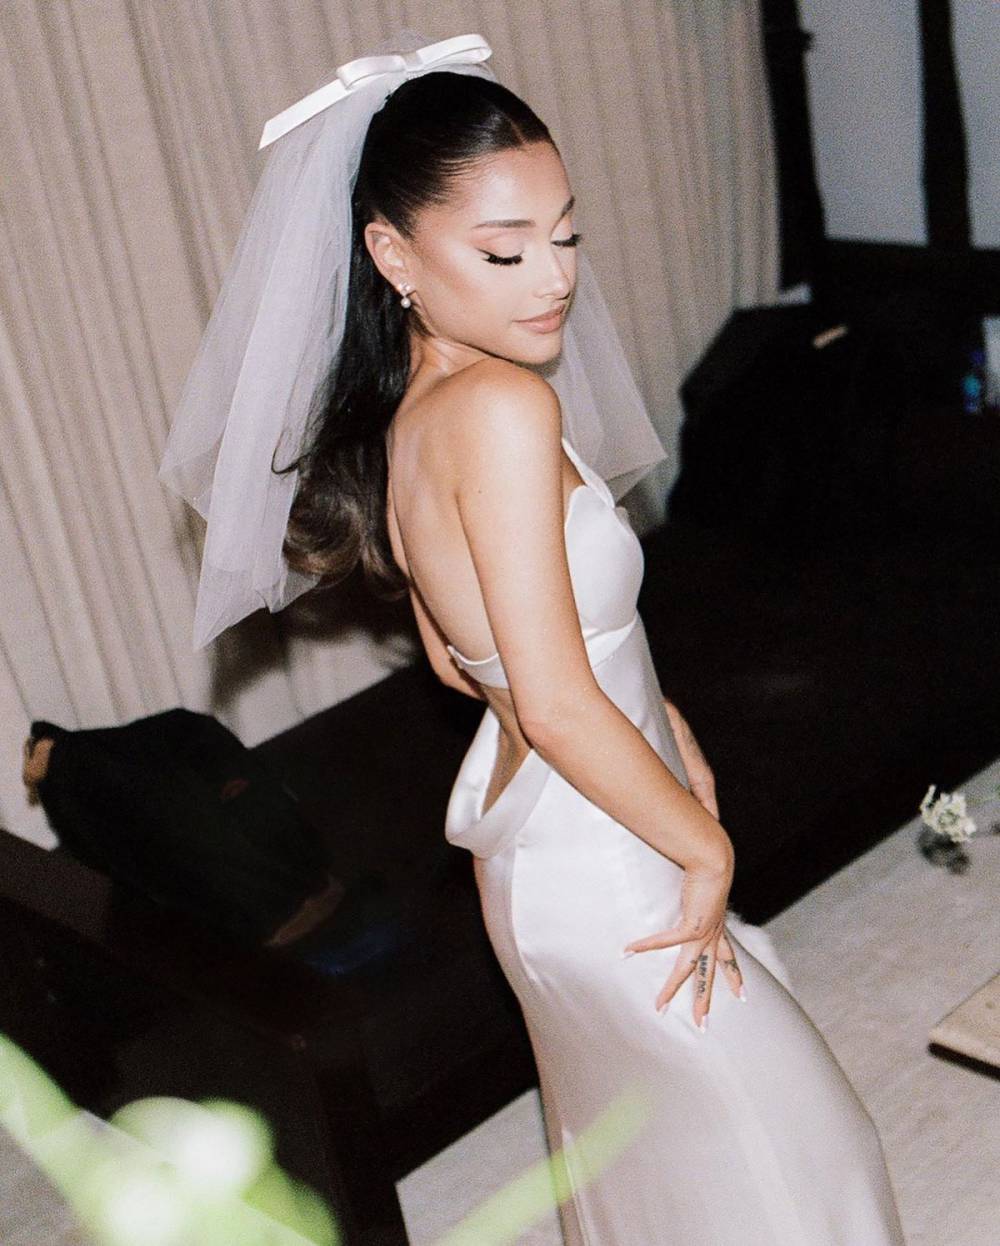 Ariana Grande’s Wedding Gown Is the Epitome of Elegance